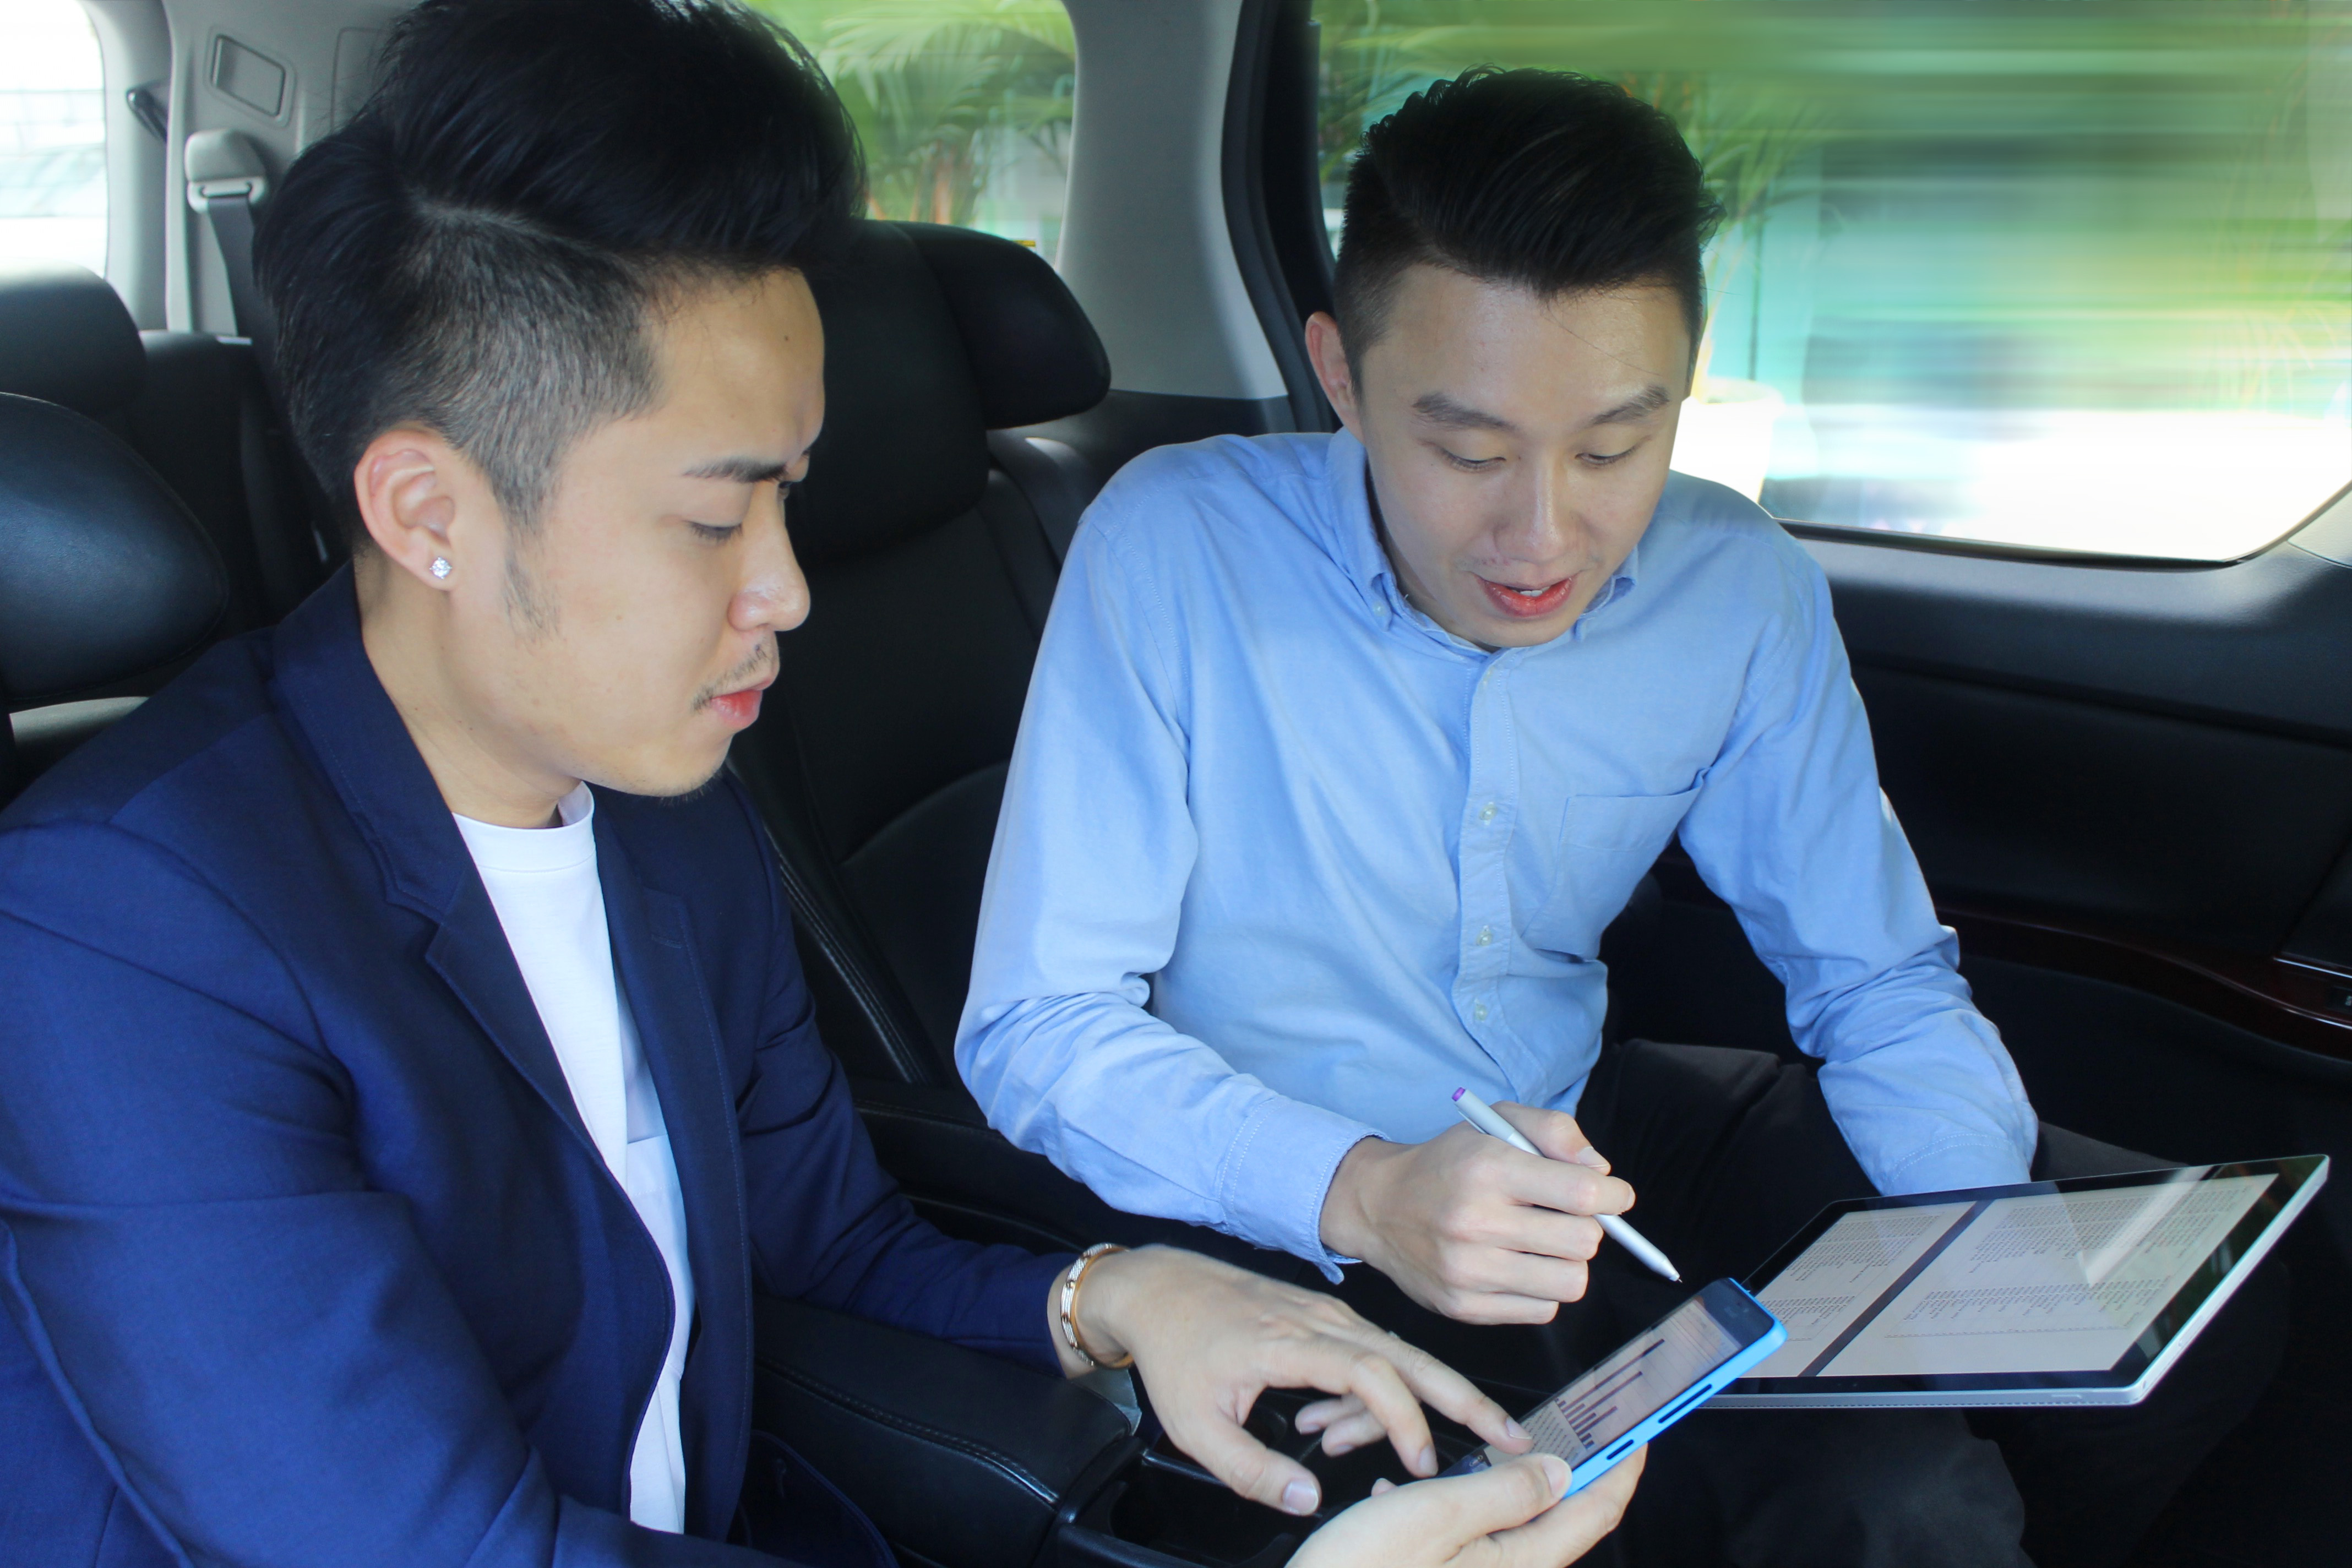 Chatime's Technology and Operations Excellence Manager Howard Woon and Bryan Loo discussing strategies on the move, with the new POS system powered by Microsoft Windows and Azure